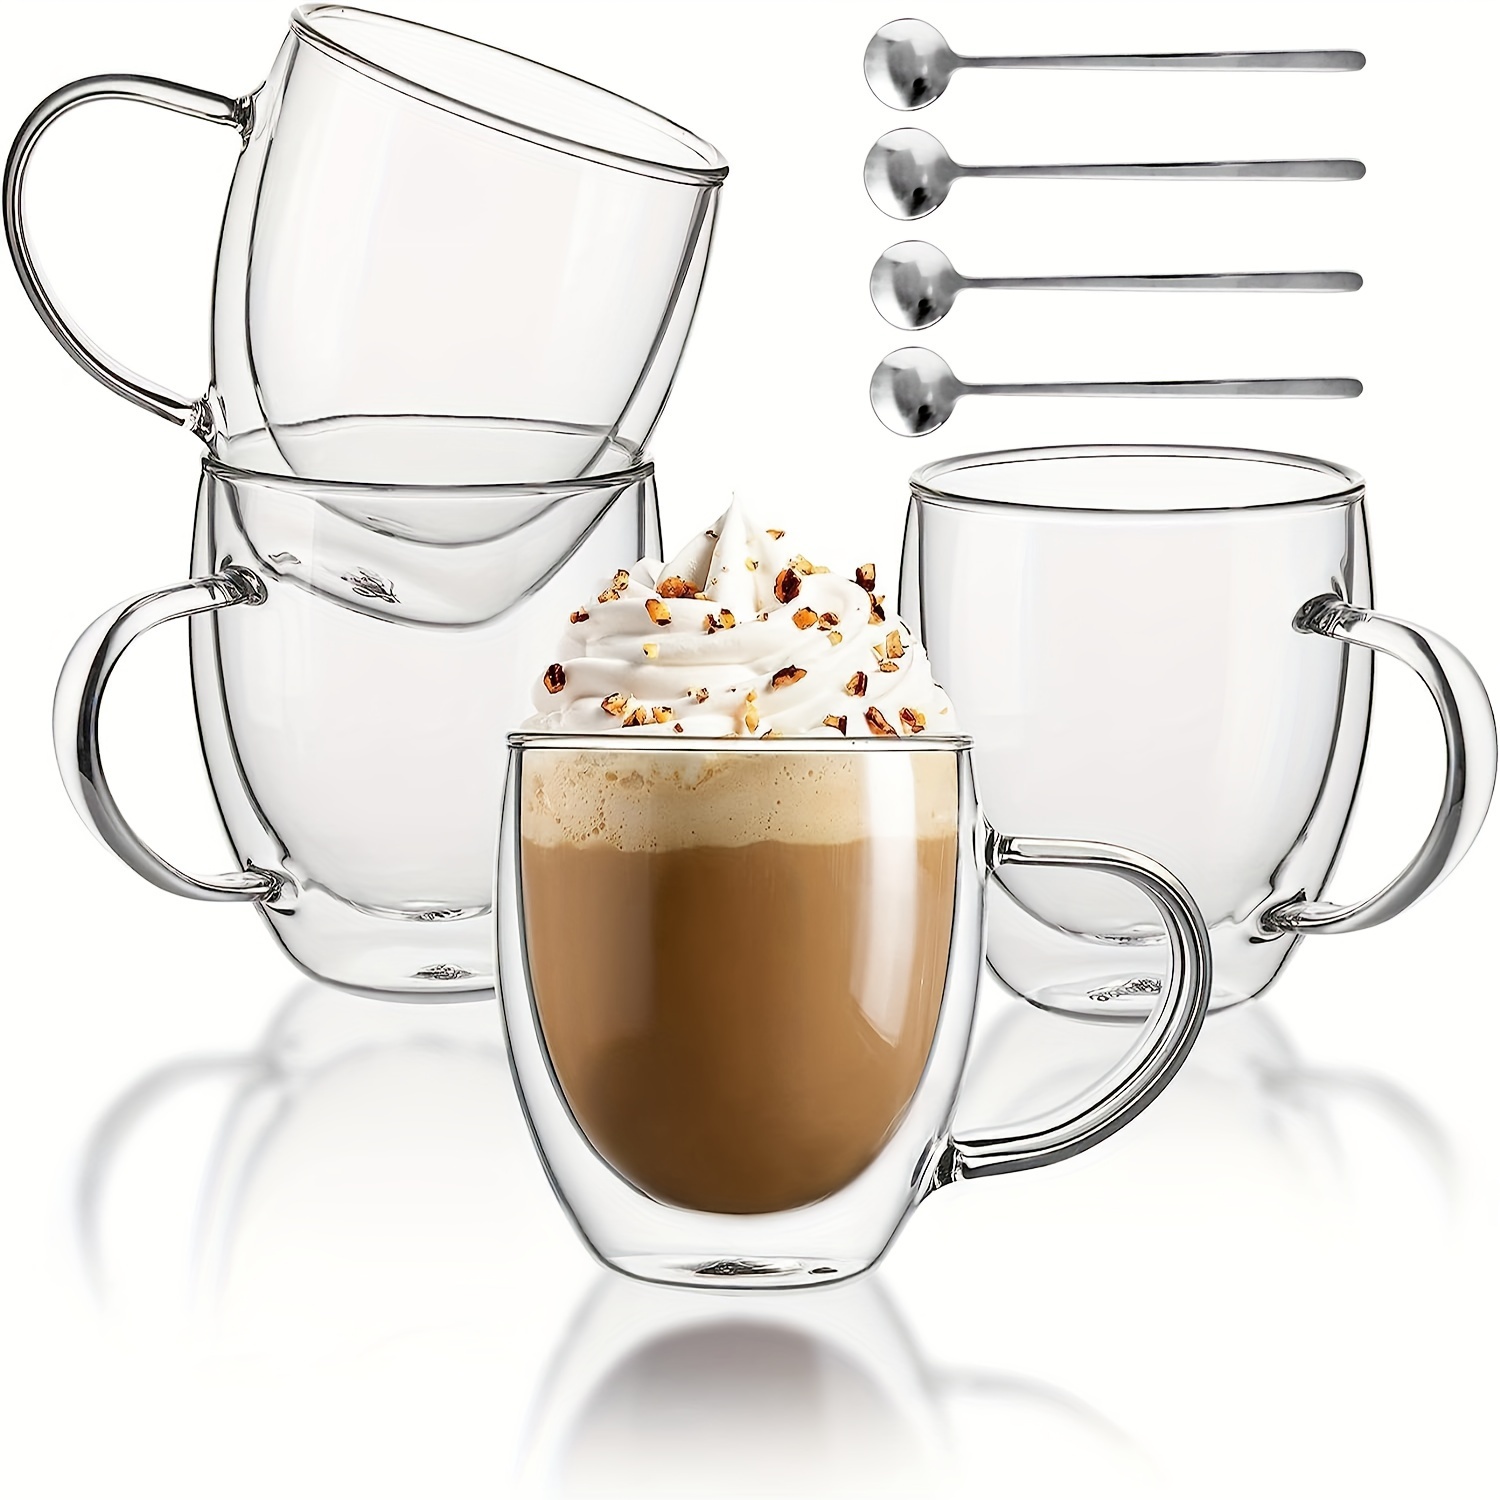 

4pcs, Glass Coffee Mugs With Spoons, 250ml Double-walled Espresso Coffee Cups, Heat Insulated Water Cups, Summer Winter Drinkware, Birthday Gifts